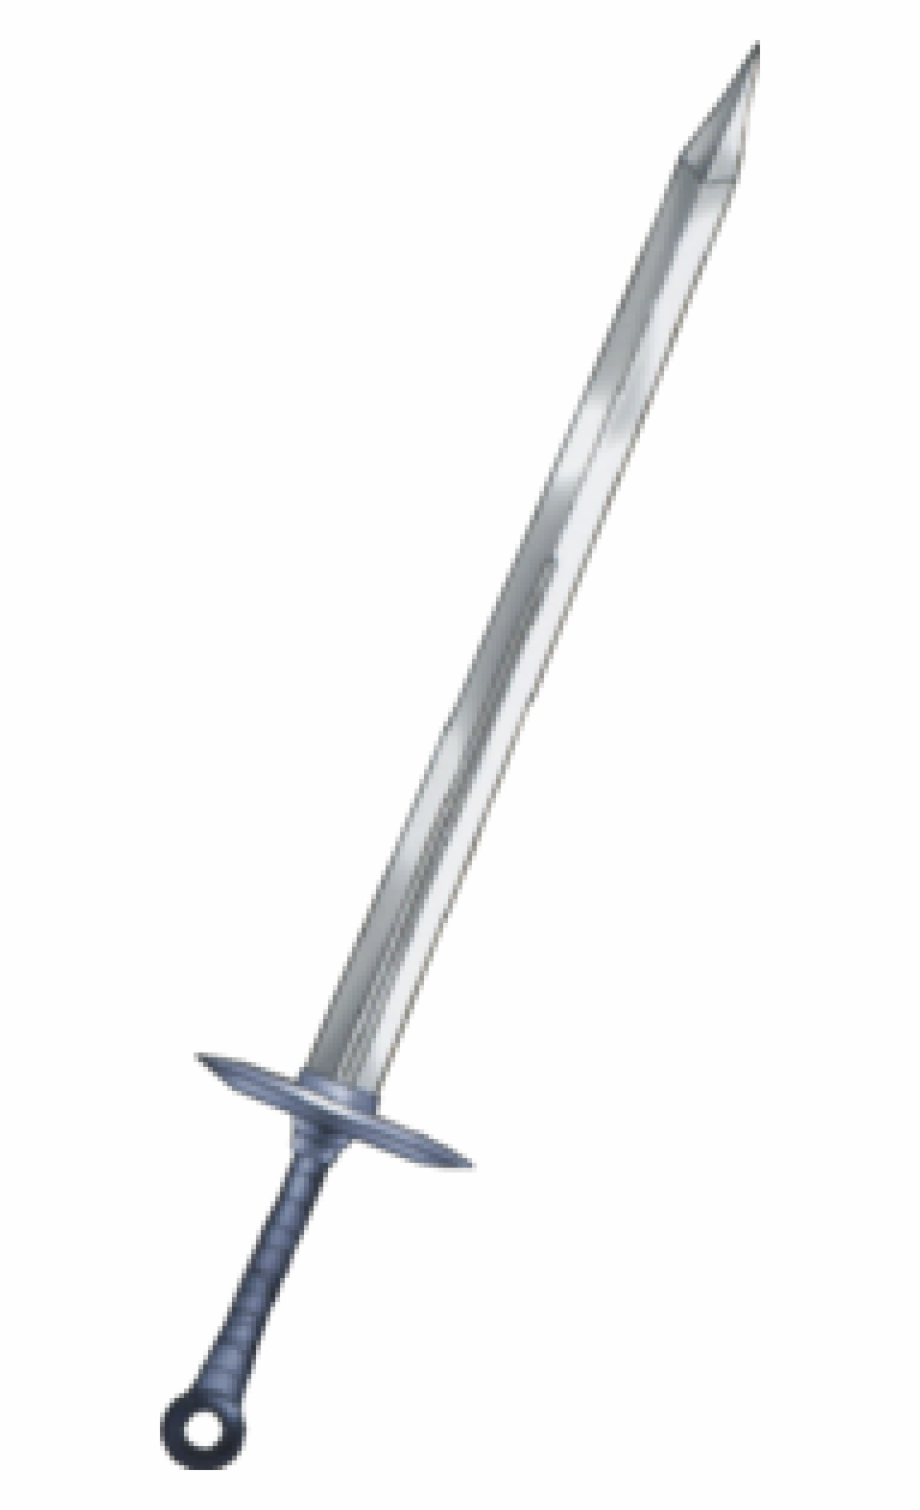 Sword Png Image Download Png Image With Transparent